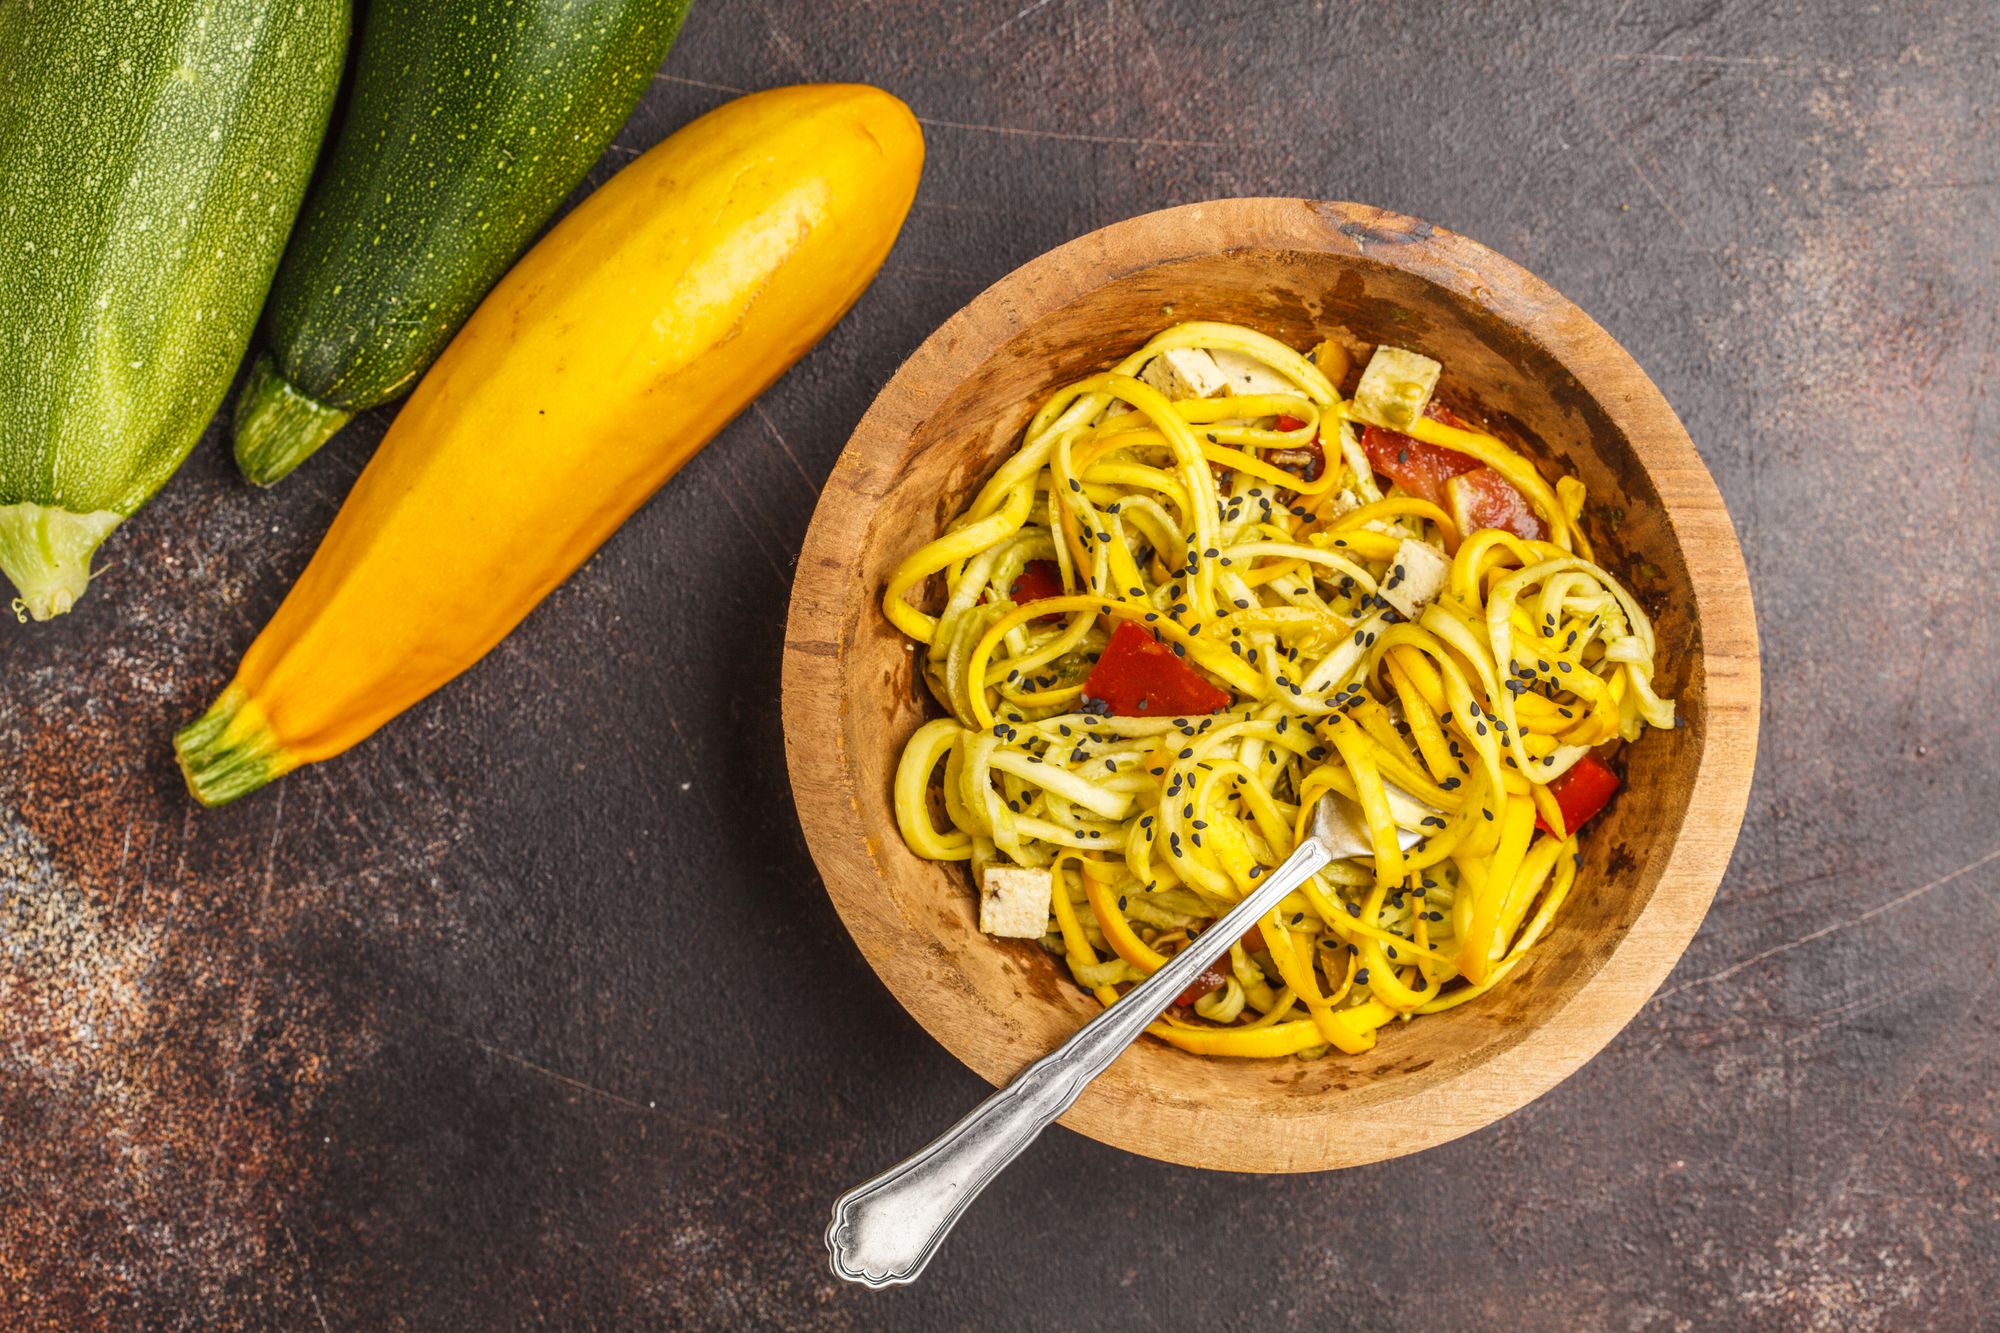 Chilli Tofu with Spiralised Courgette